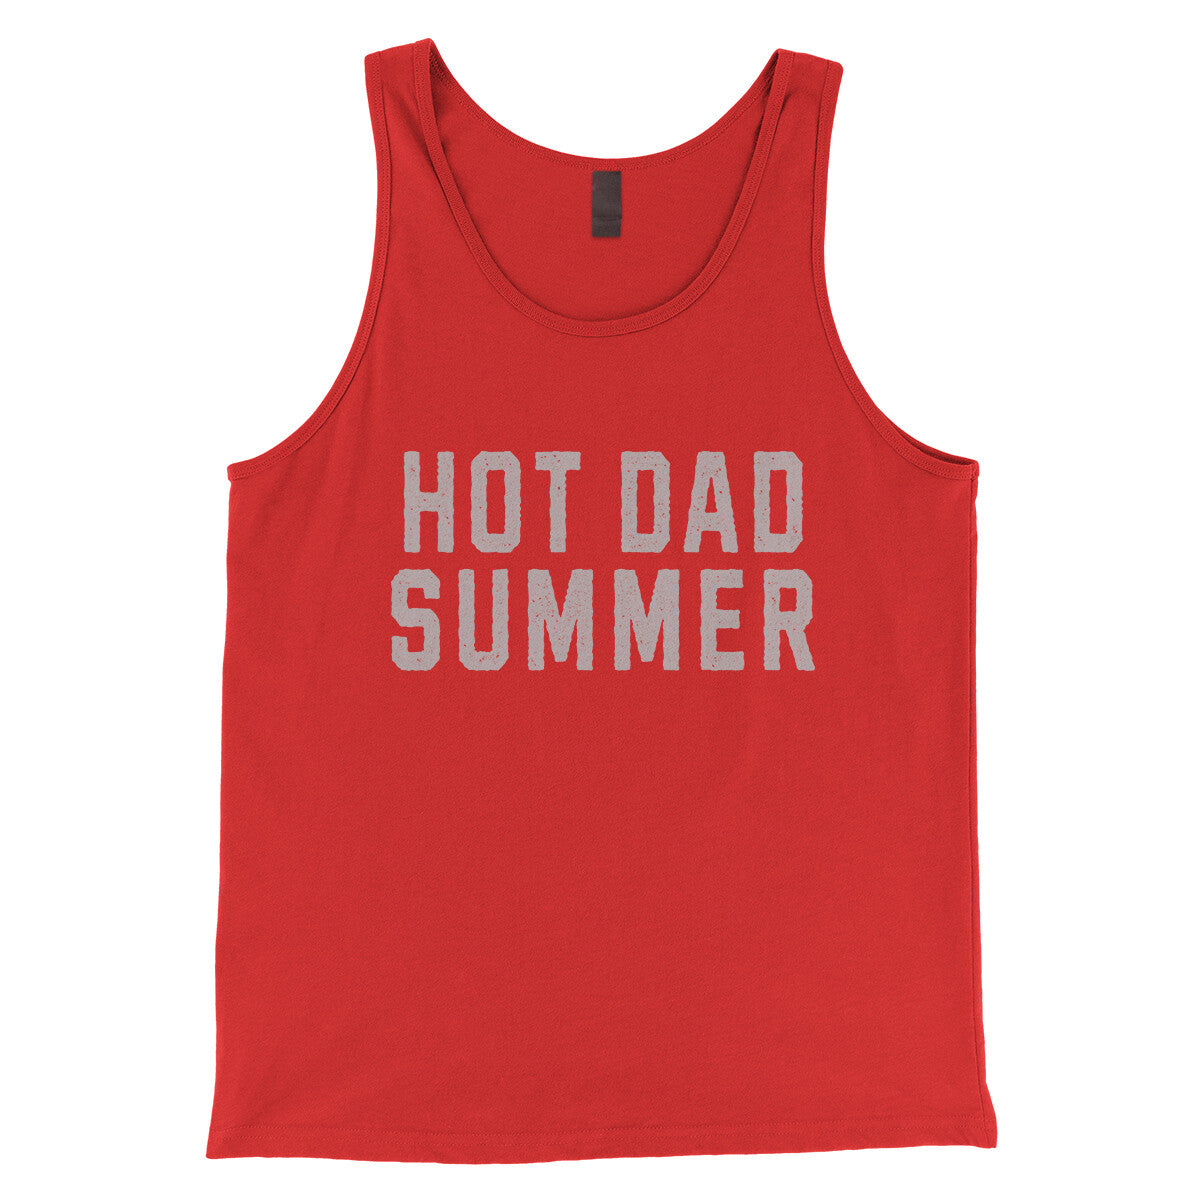 Hot Dad Summer in Red Color